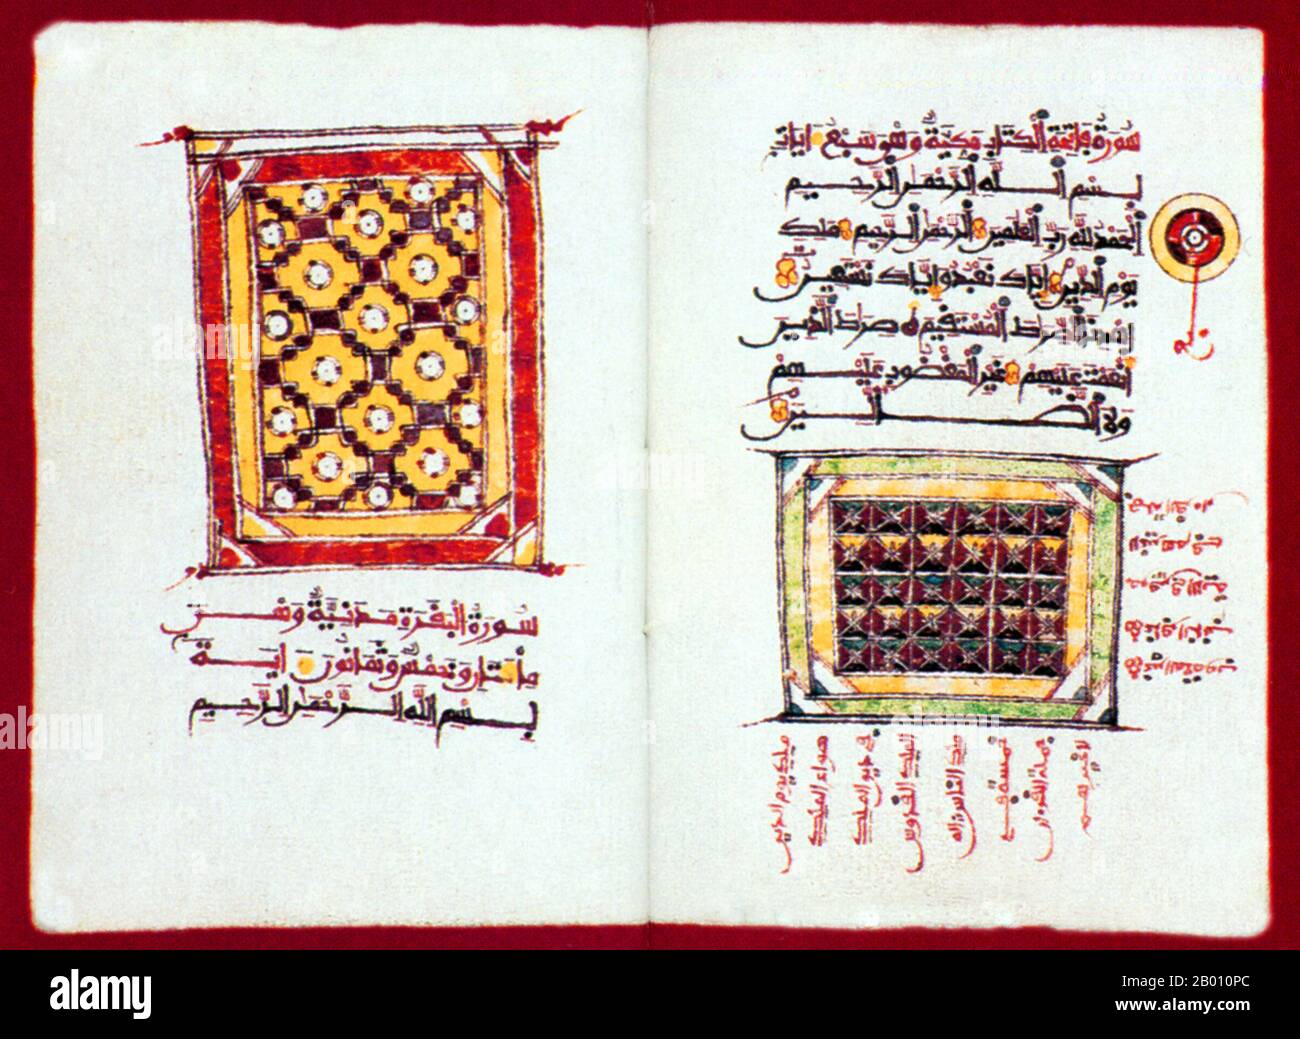 Nigeria: A mid-19th century version of the Qur'an from Kano in Nigeria.  The Qur’an is the religious text of Islam. It is widely regarded as the finest piece of literature in the Arabic language. Muslims hold that the Qur’an is the verbal divine guidance and moral direction for mankind. Muslims also consider the original Arabic verbal text to be the final revelation of God and believe that the Qur’an was repeatedly revealed from Allah to Muhammad verbally through the angel Jibril (Gabriel) over a period of approximately 33 years, beginning in 610 CE. Stock Photo